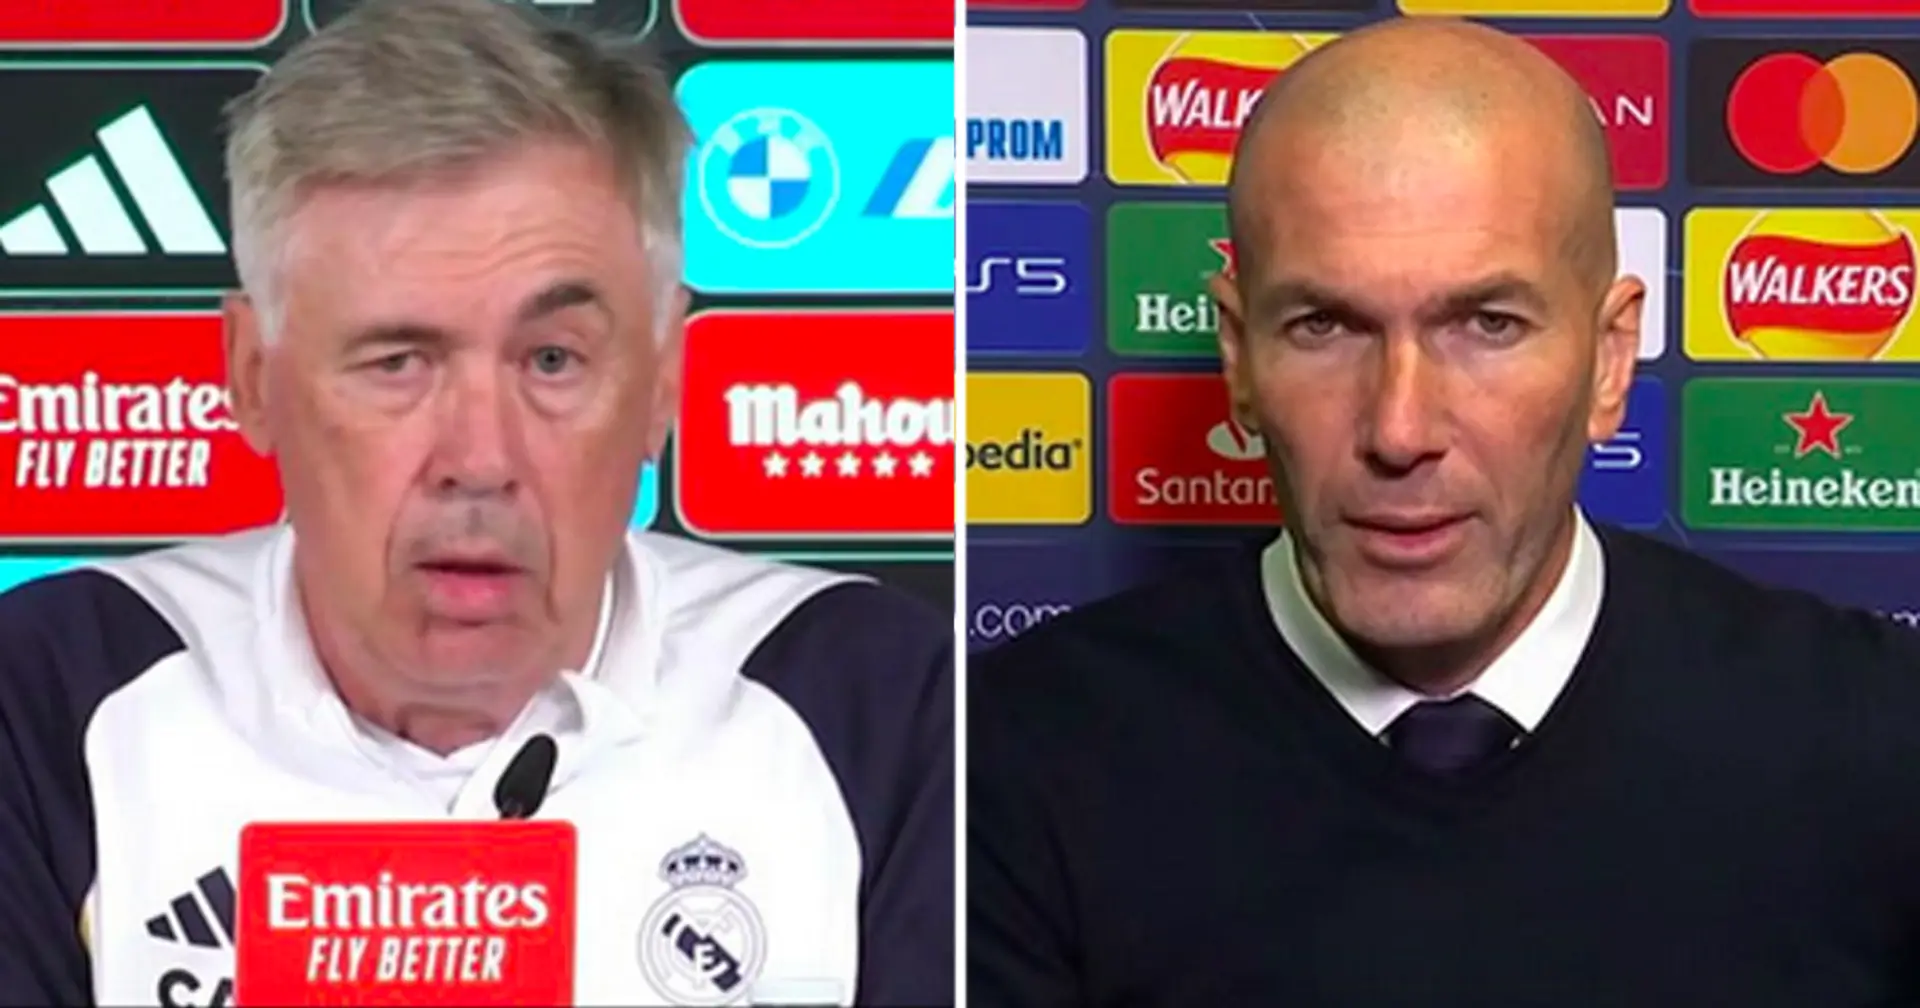 Ancelotti beats Zidane to historic stat and 2 more big stories you might've missed